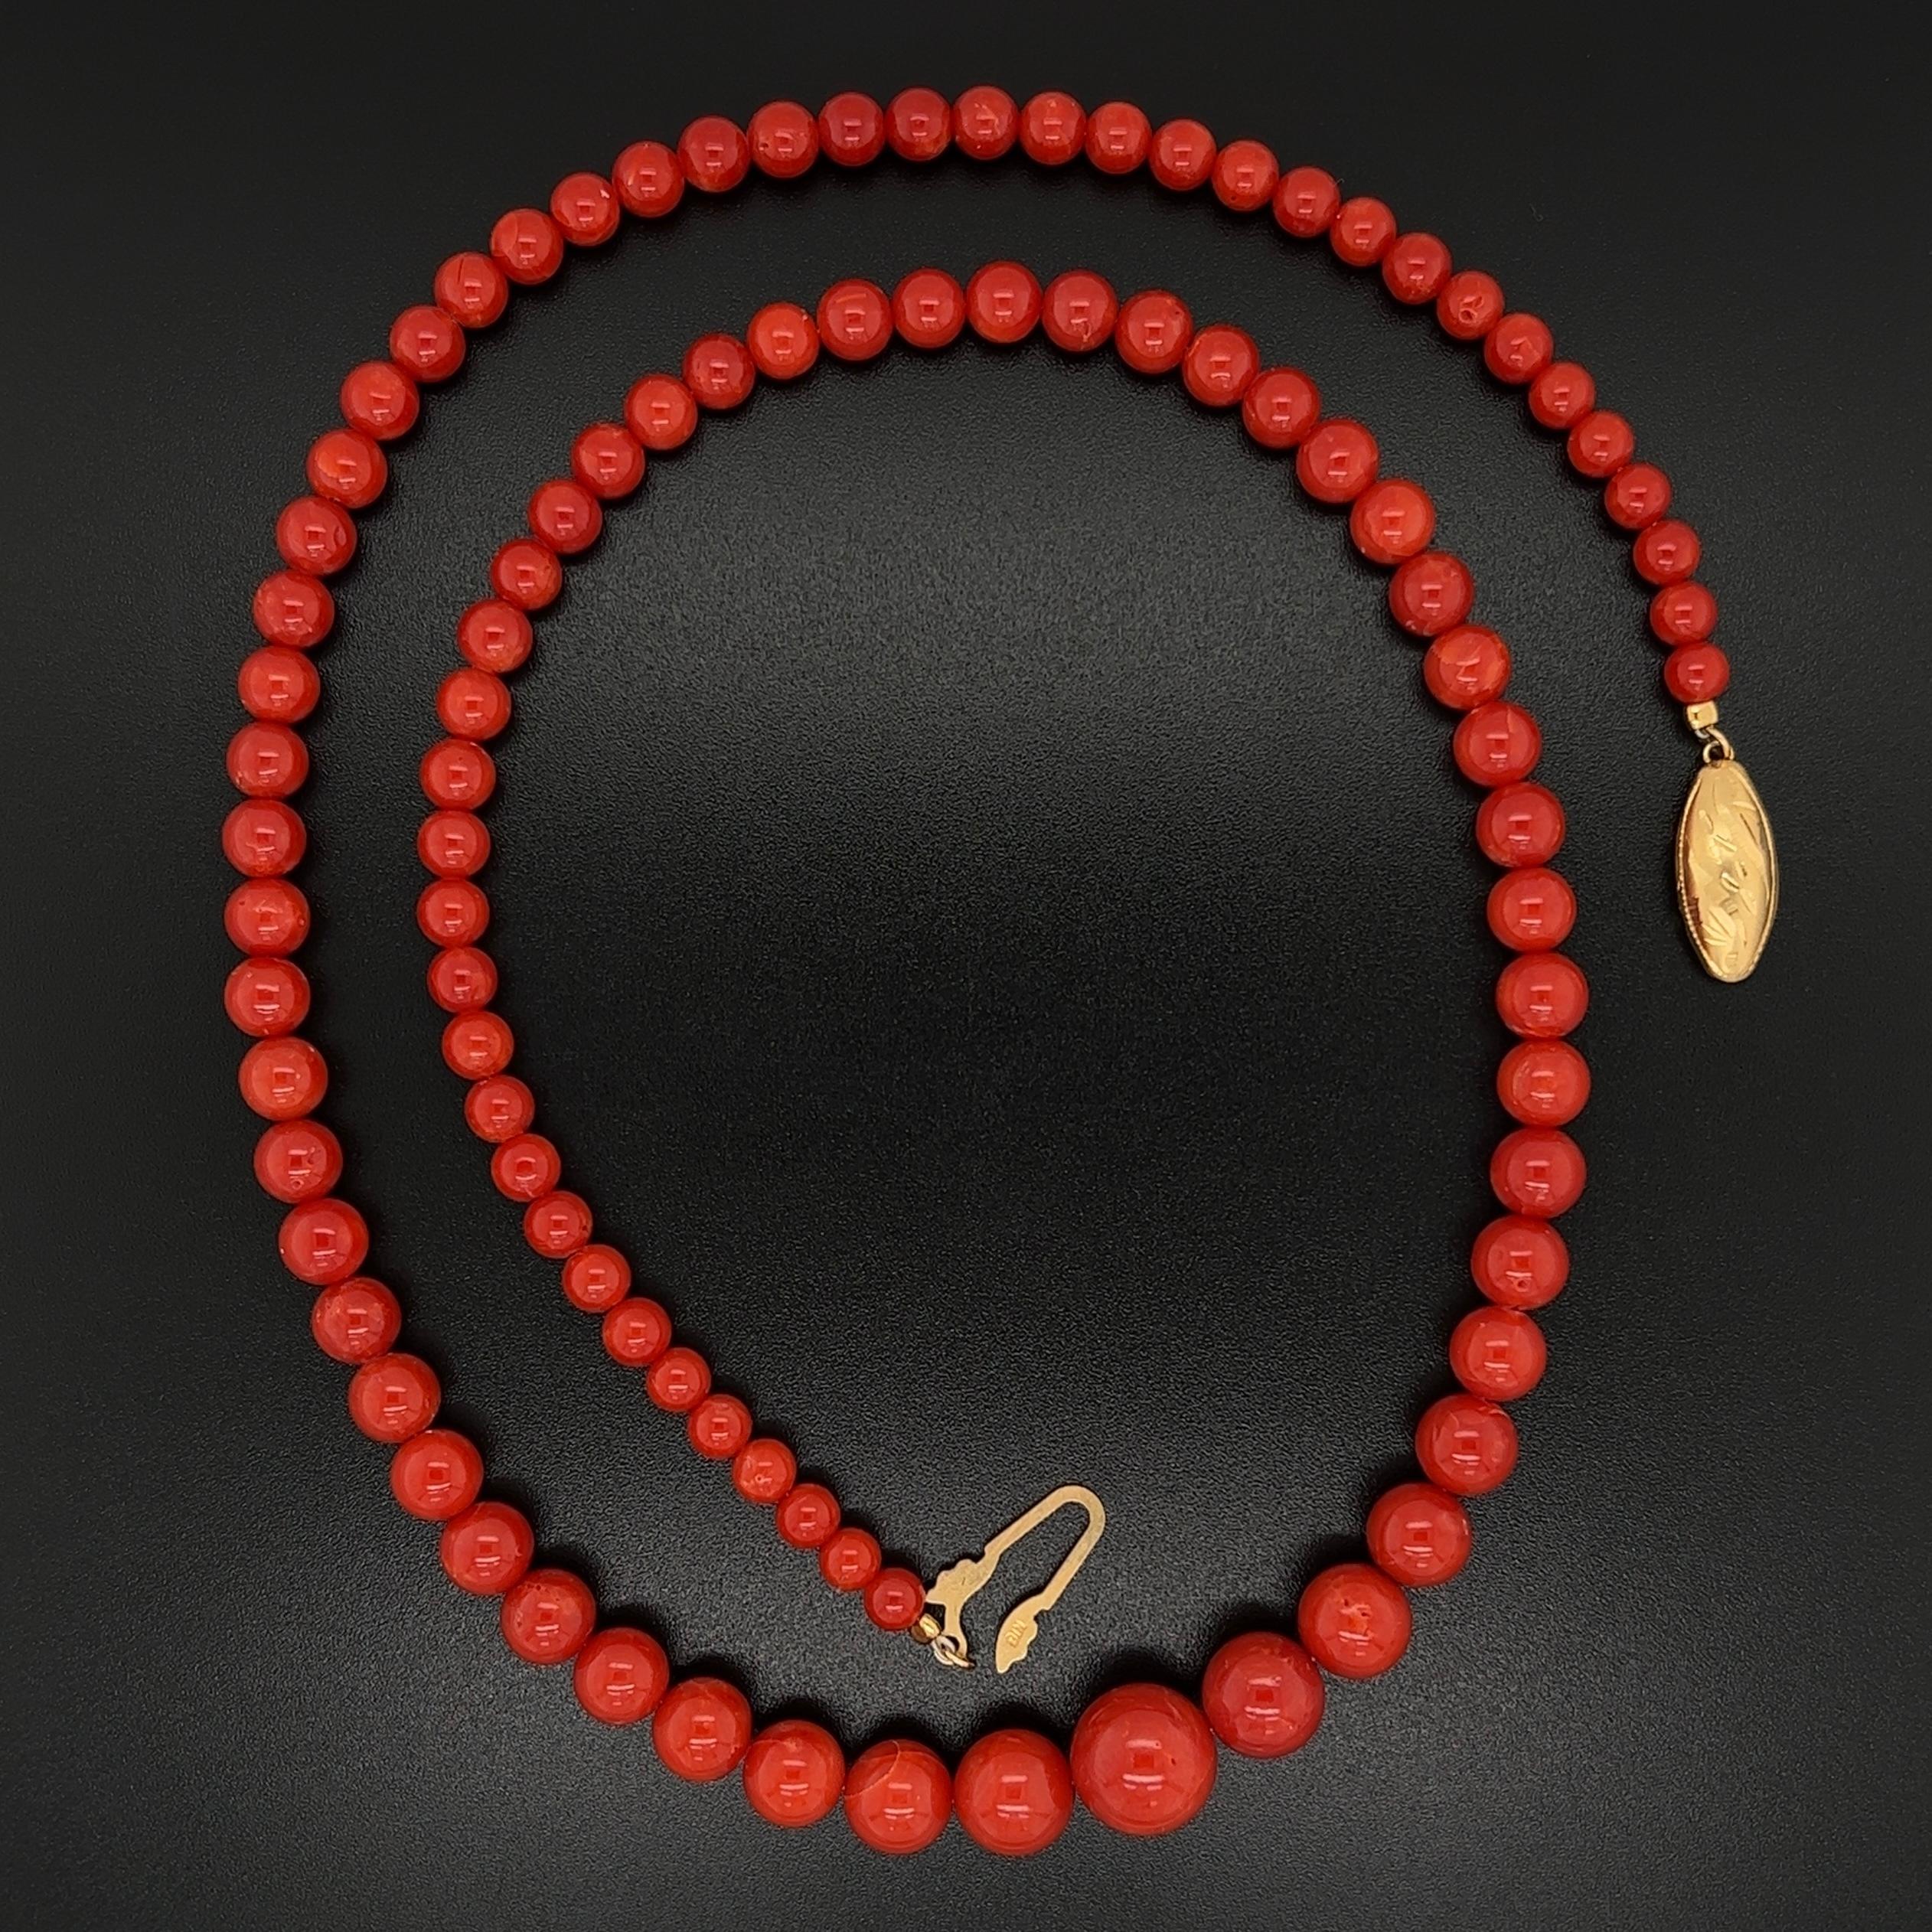 Simply Beautiful! Red Coral Necklace, comprising 95 Coral beads, each approx. 3.9mm-9.3mm, held by a 18K Yellow Gold clasp. Hand strung with matching silk cord. The necklace measures approx. 19” long. More Beautiful in real time! Classic and